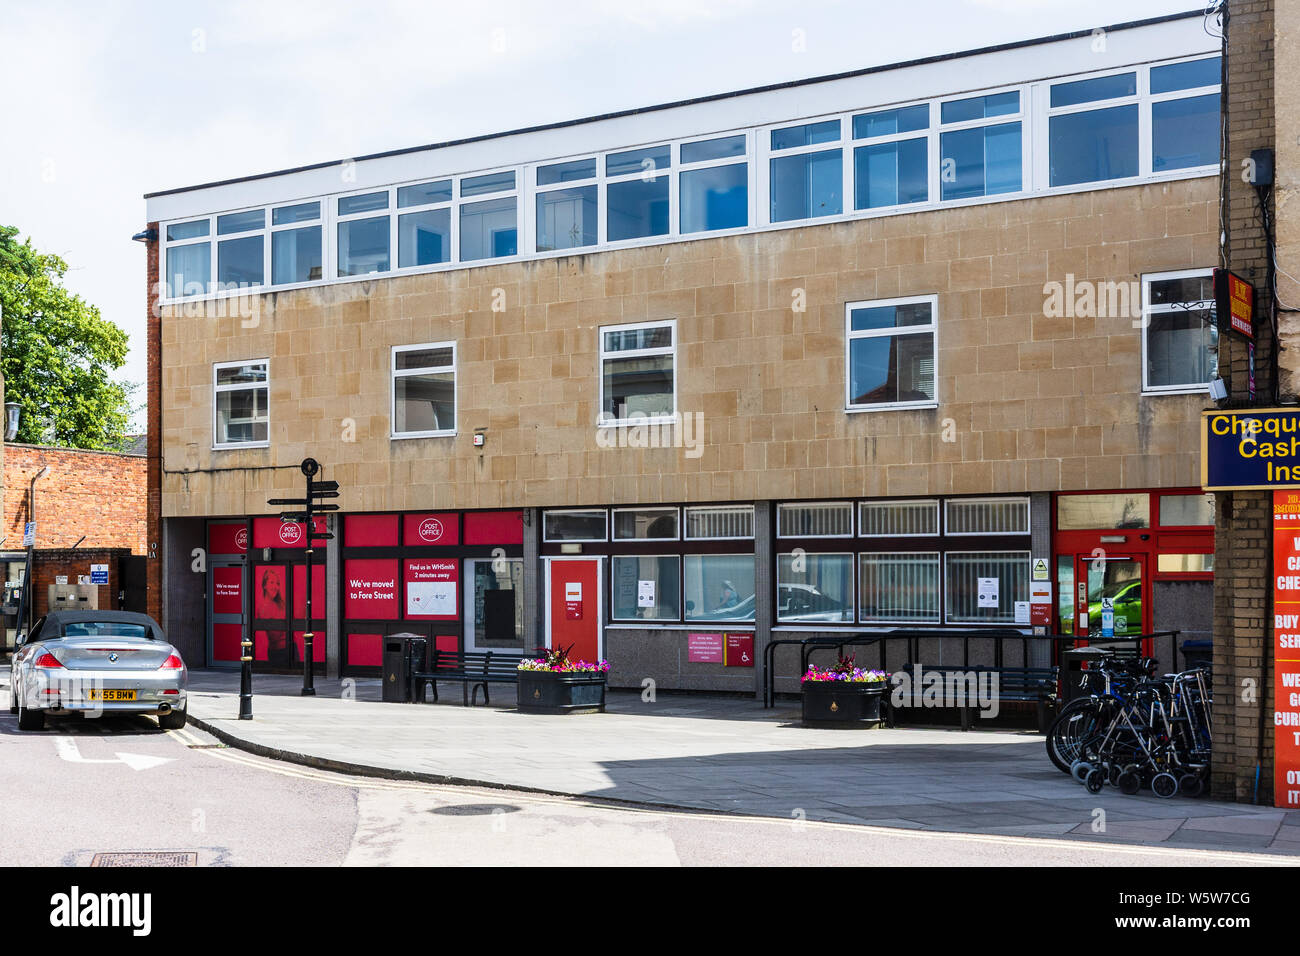 The main post office in Trowbridge Wiltshire closed down with signs directing people to the replacement counter service in a nearby W.H. Smith Stock Photo